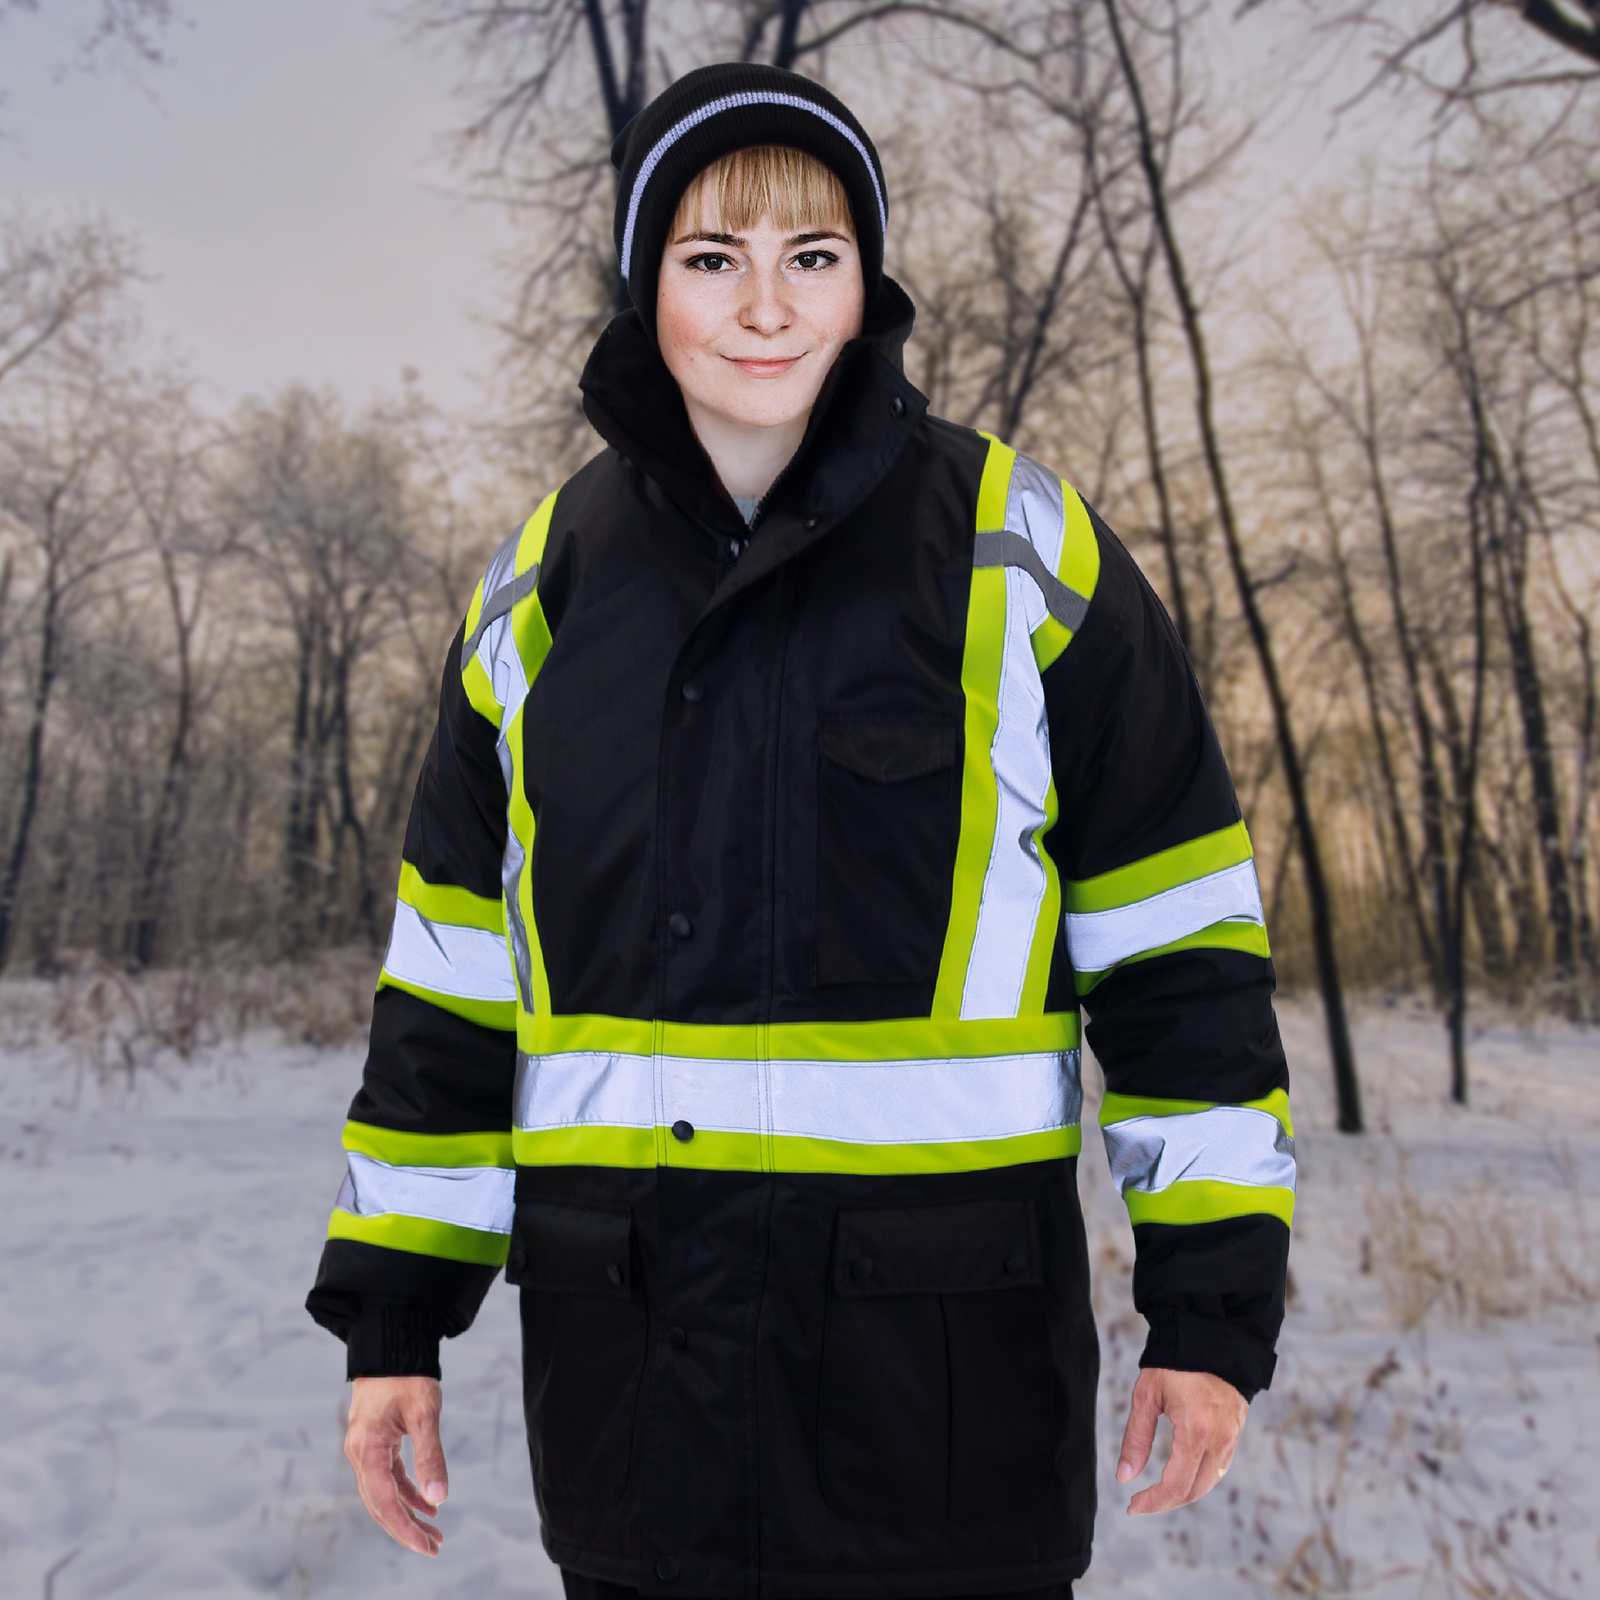 Woman wearing the insulated hi vis ANSI jacket for winter protection